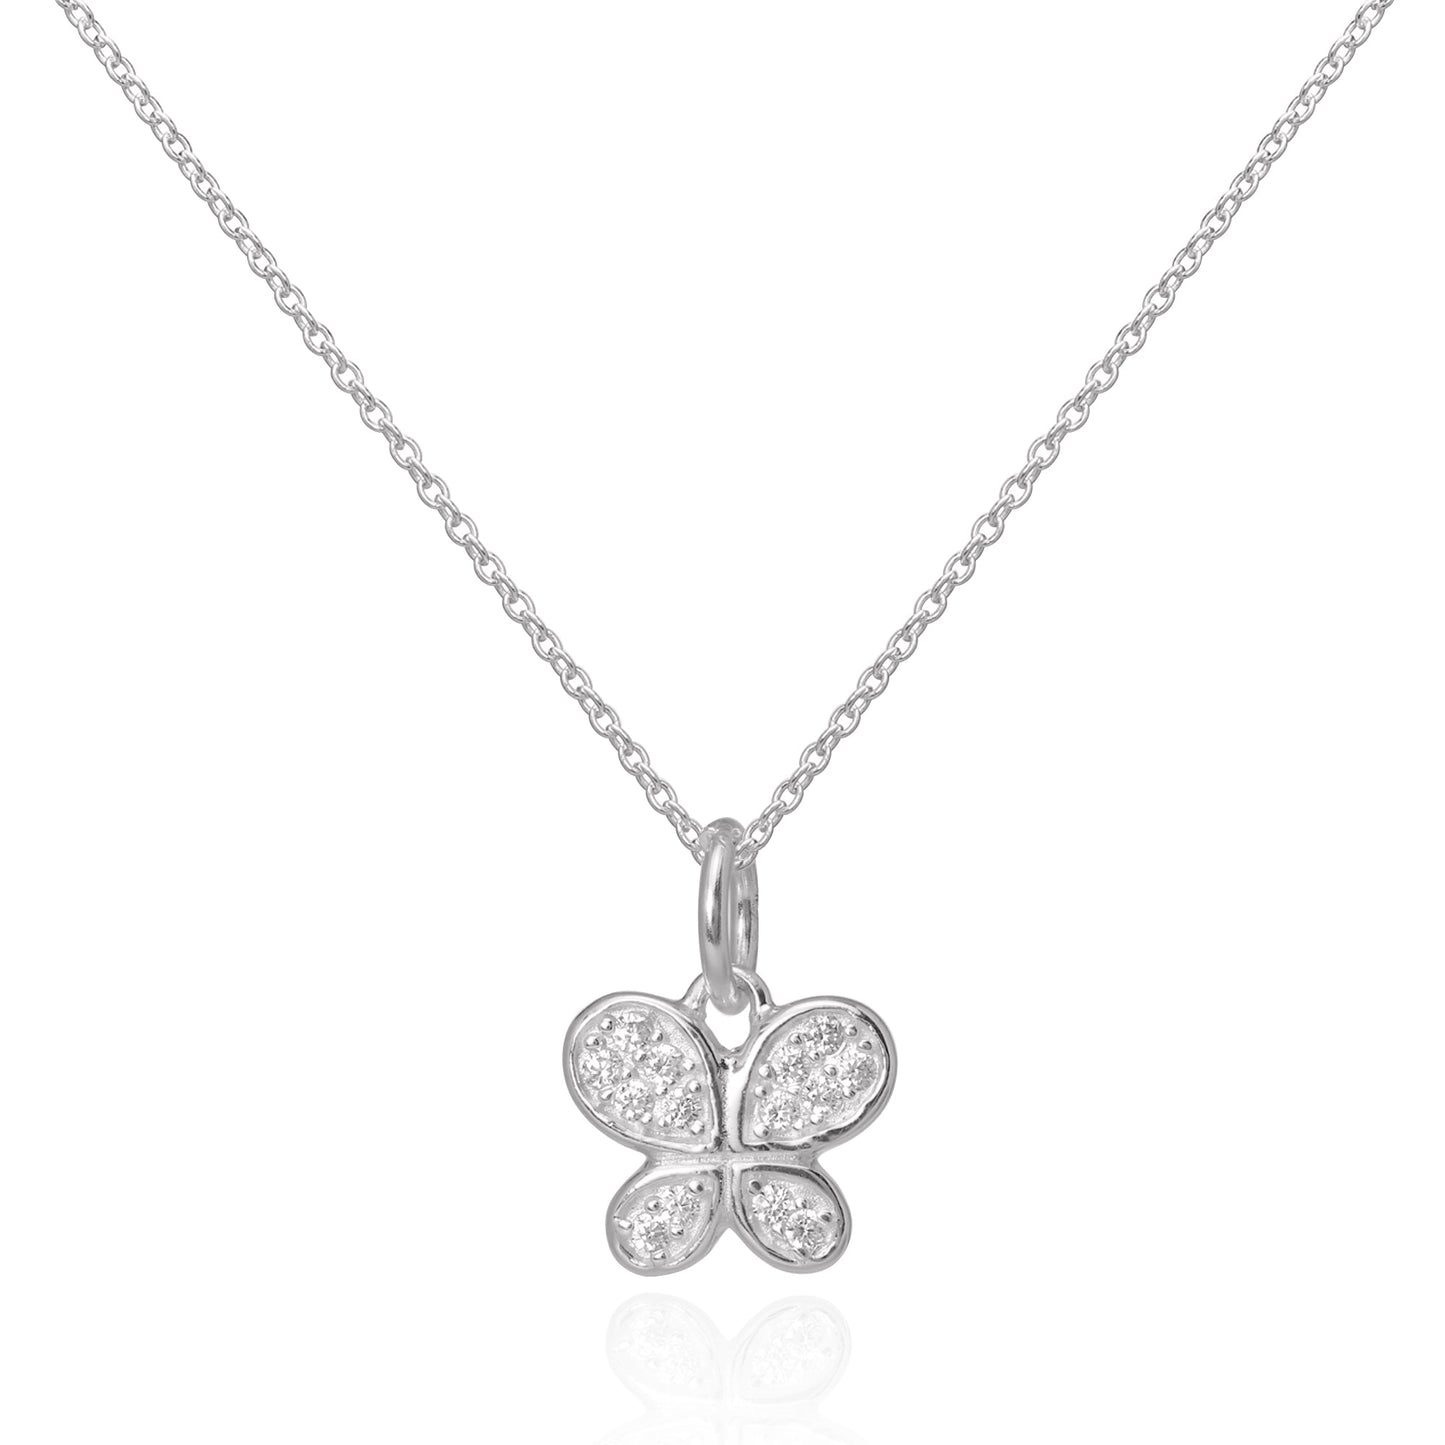 Sterling Silver CZ Crystal Encrusted Butterfly Pendant Necklace 16 - 22 Inches